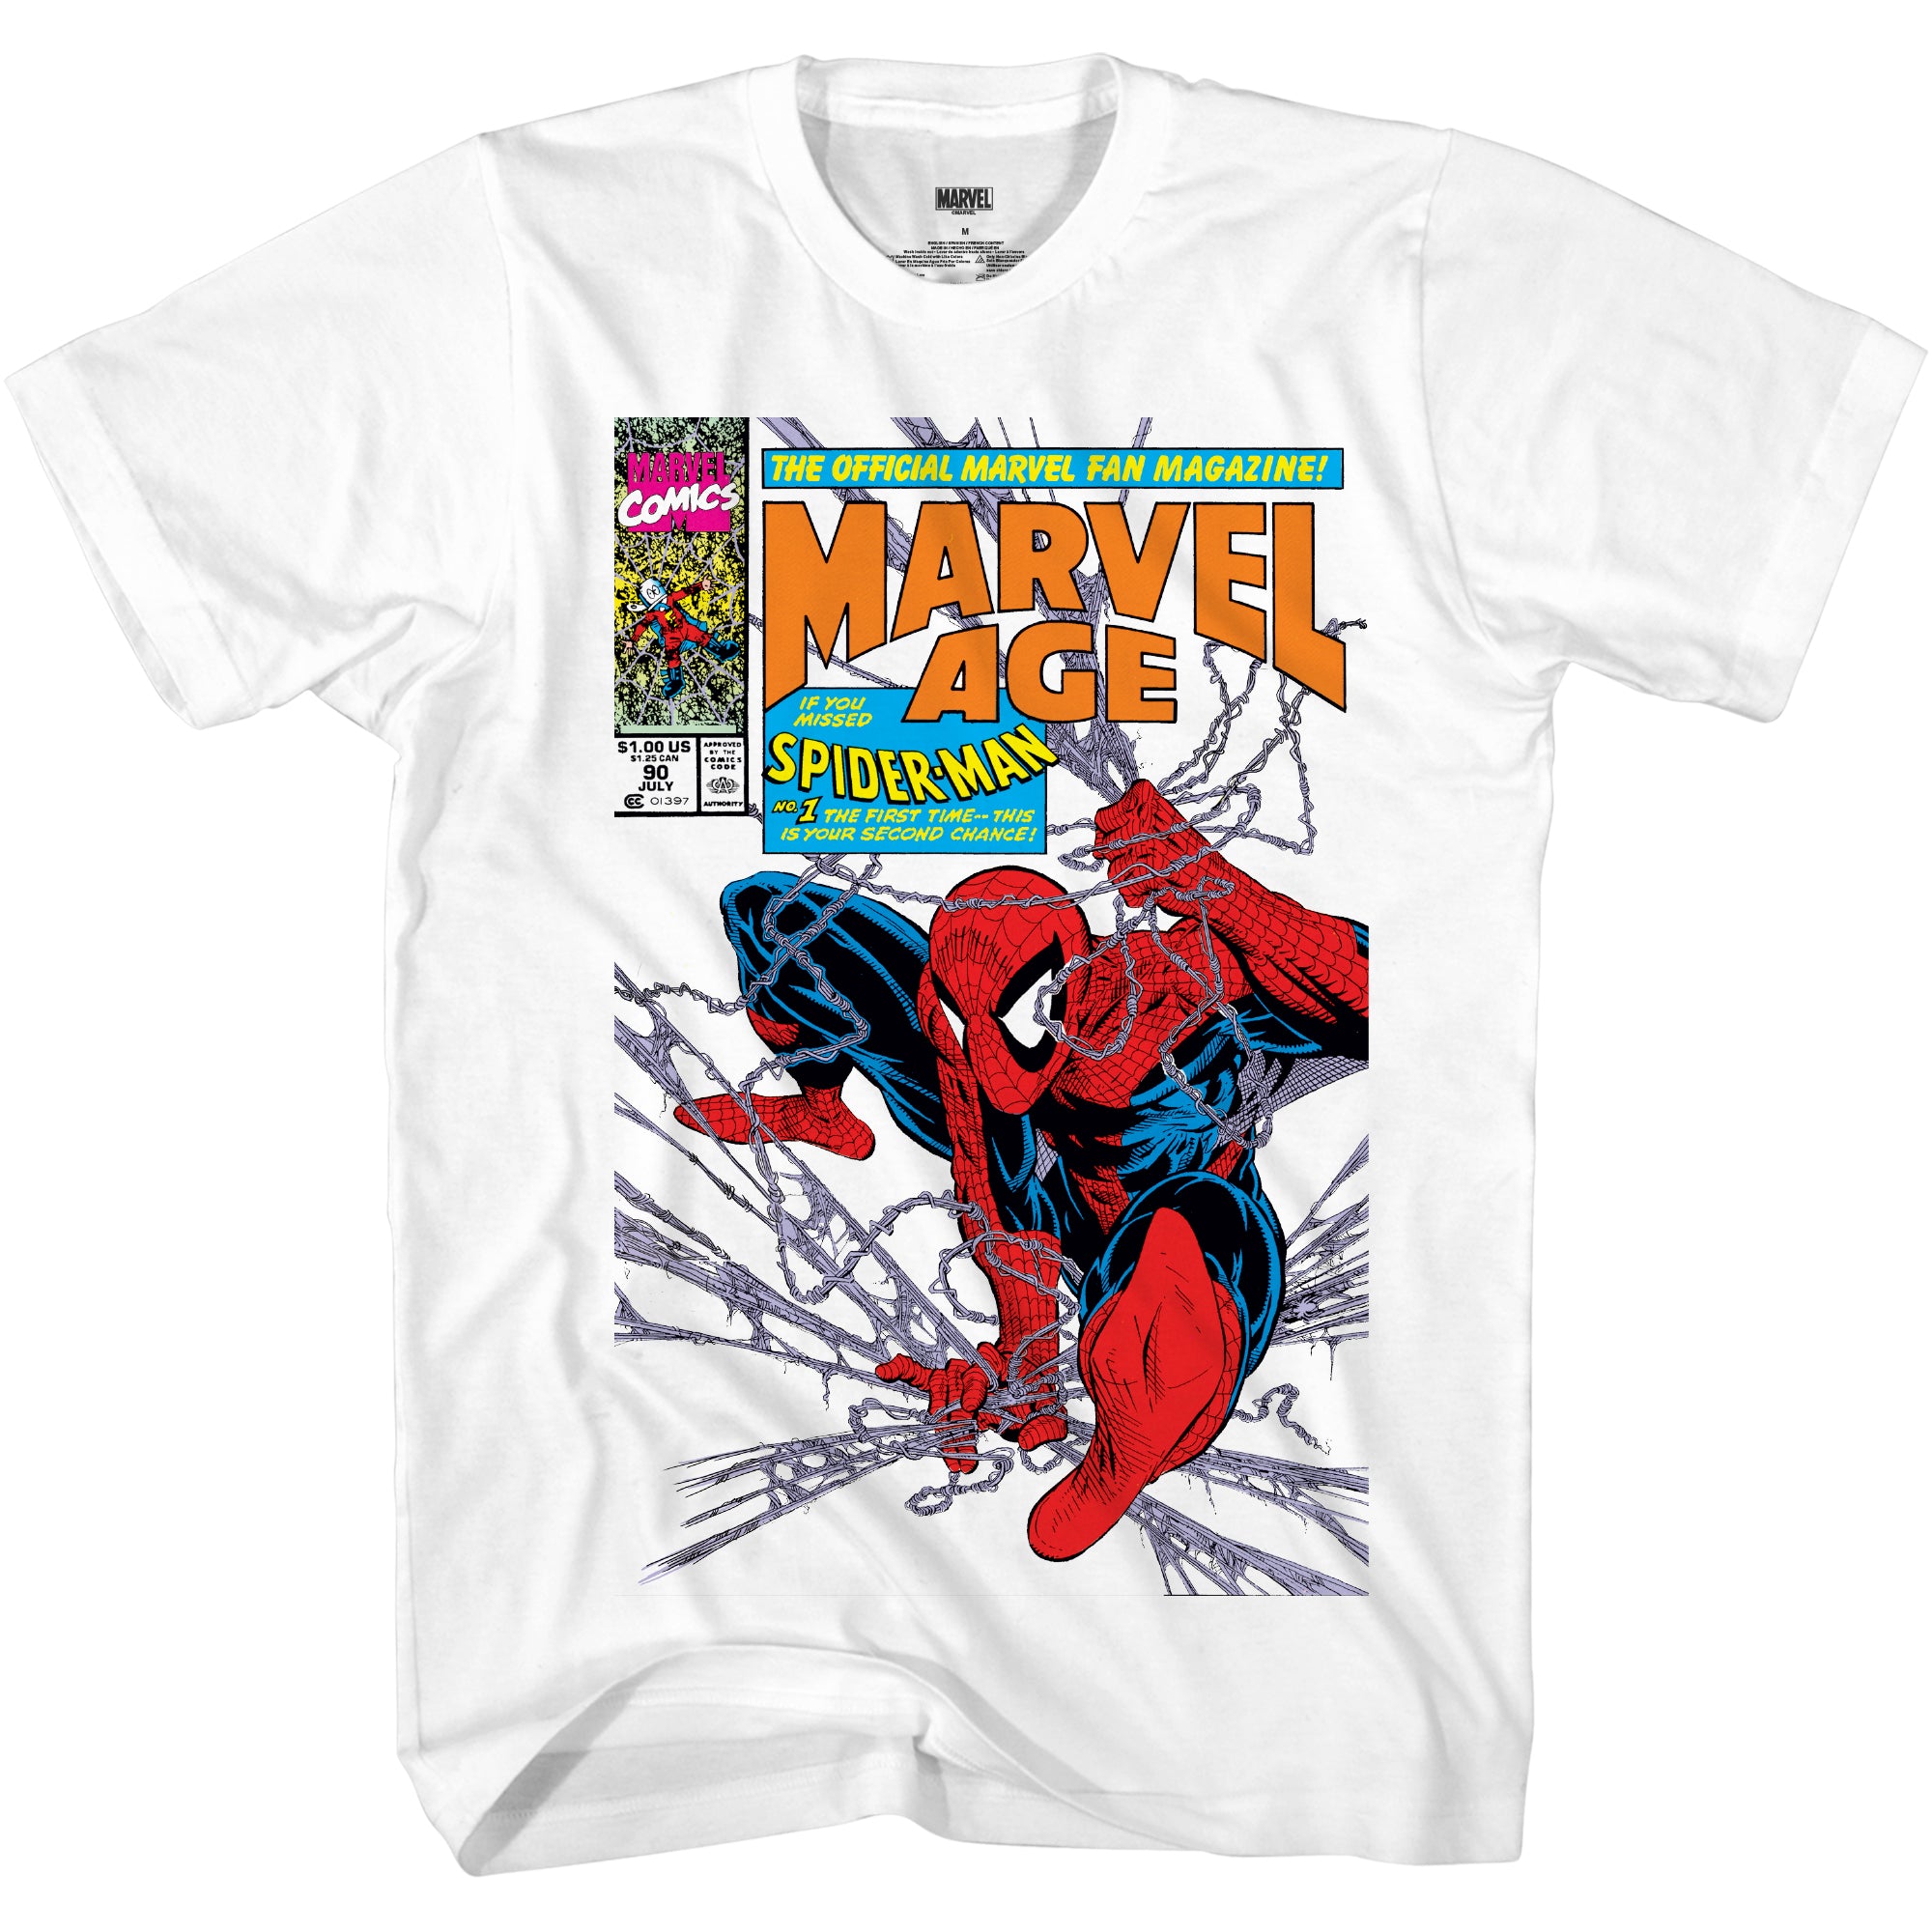 Spider-Man  Clothes and accessories for merchandise fans